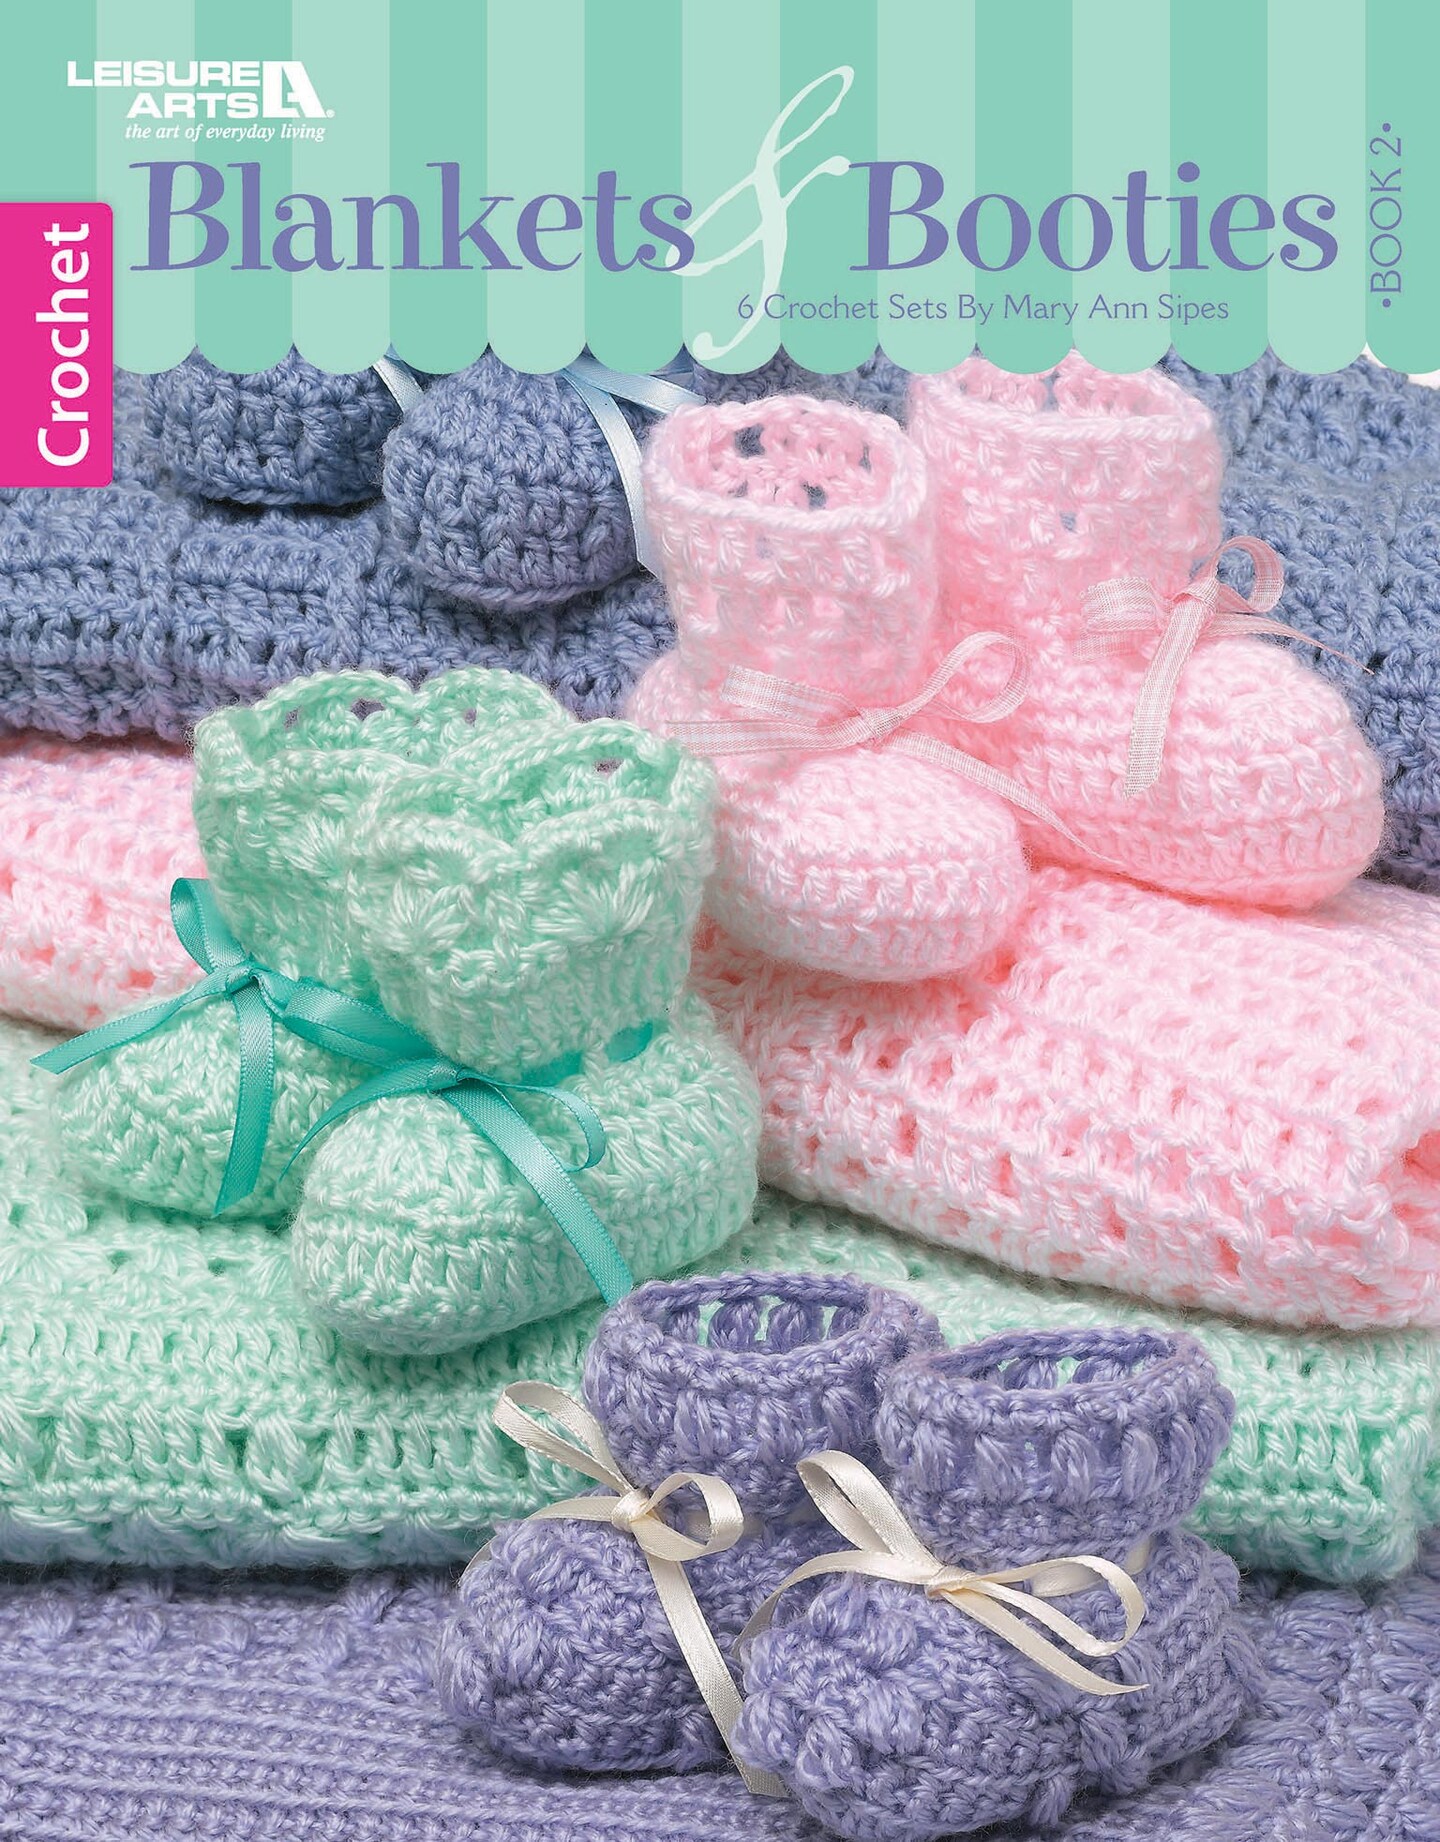 Leisure Arts Blankets and Booties #2 Crochet Book